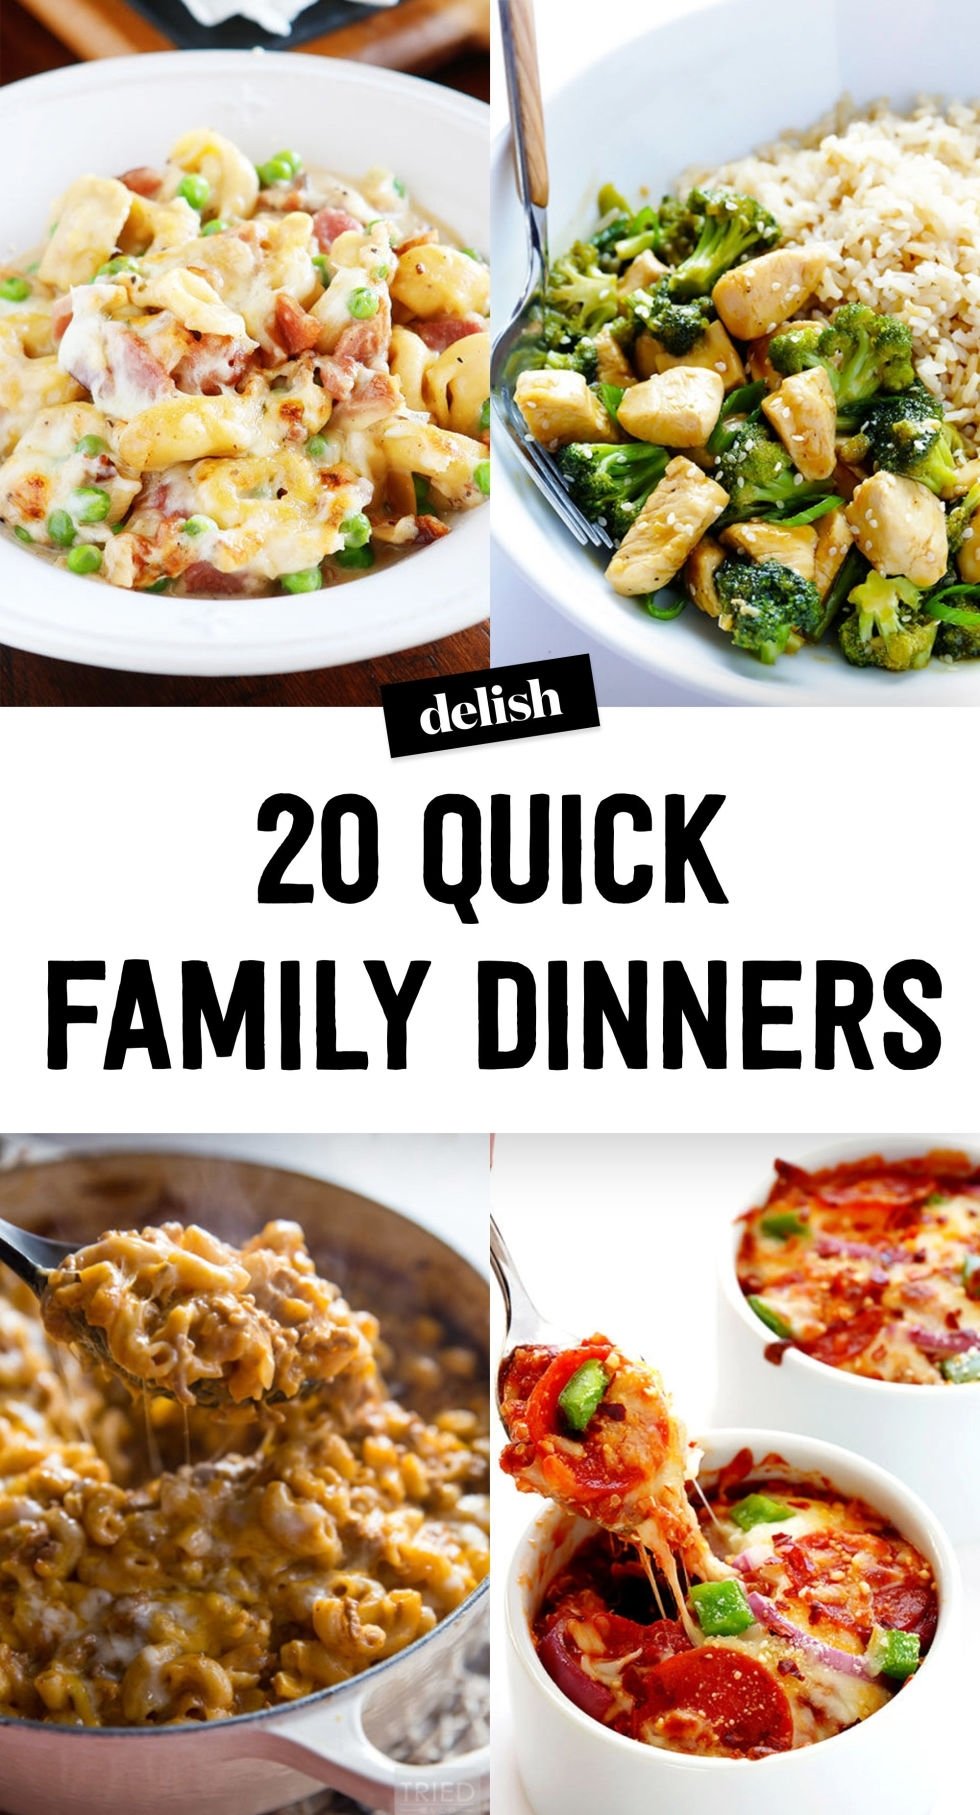 10 Best Dinner Ideas For The Family download easy fast dinner recipes for family food photos 12 2022